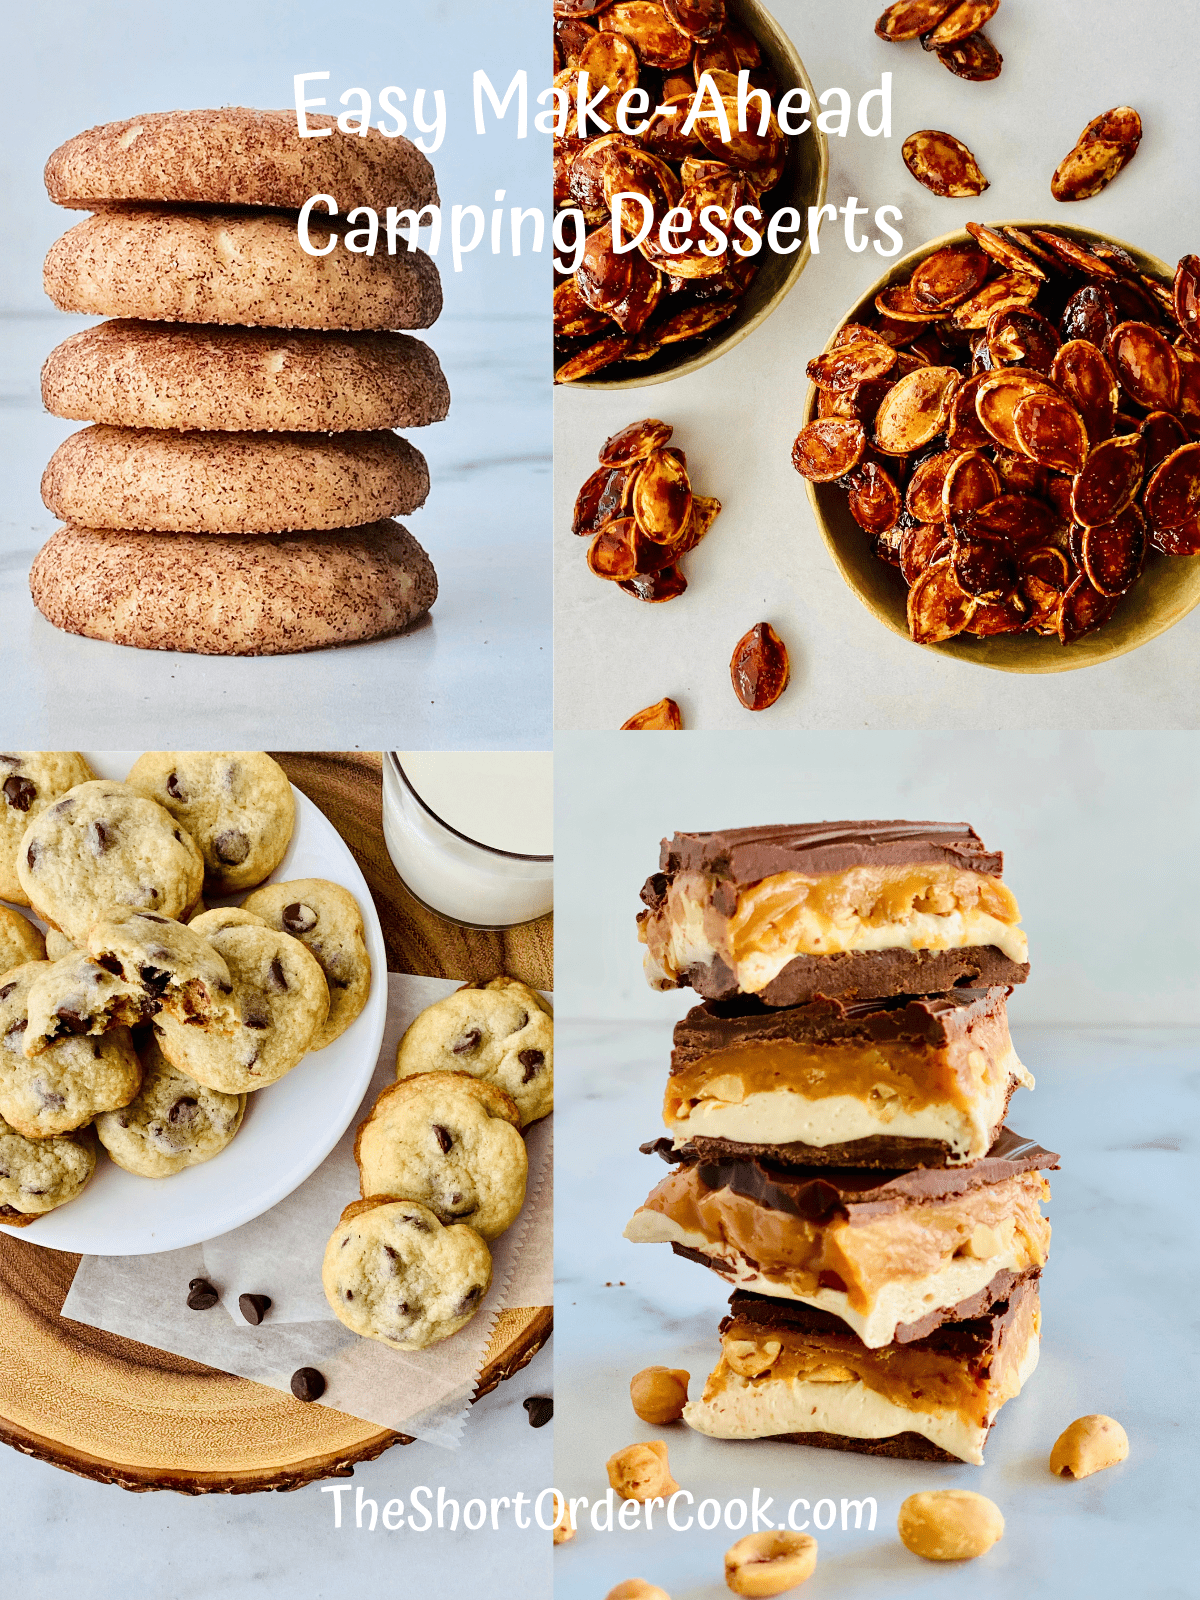 4 recipe images for snickerdoodles, honey roasted pumpkin seeds, snickers bars, and chocolate chip cookies.